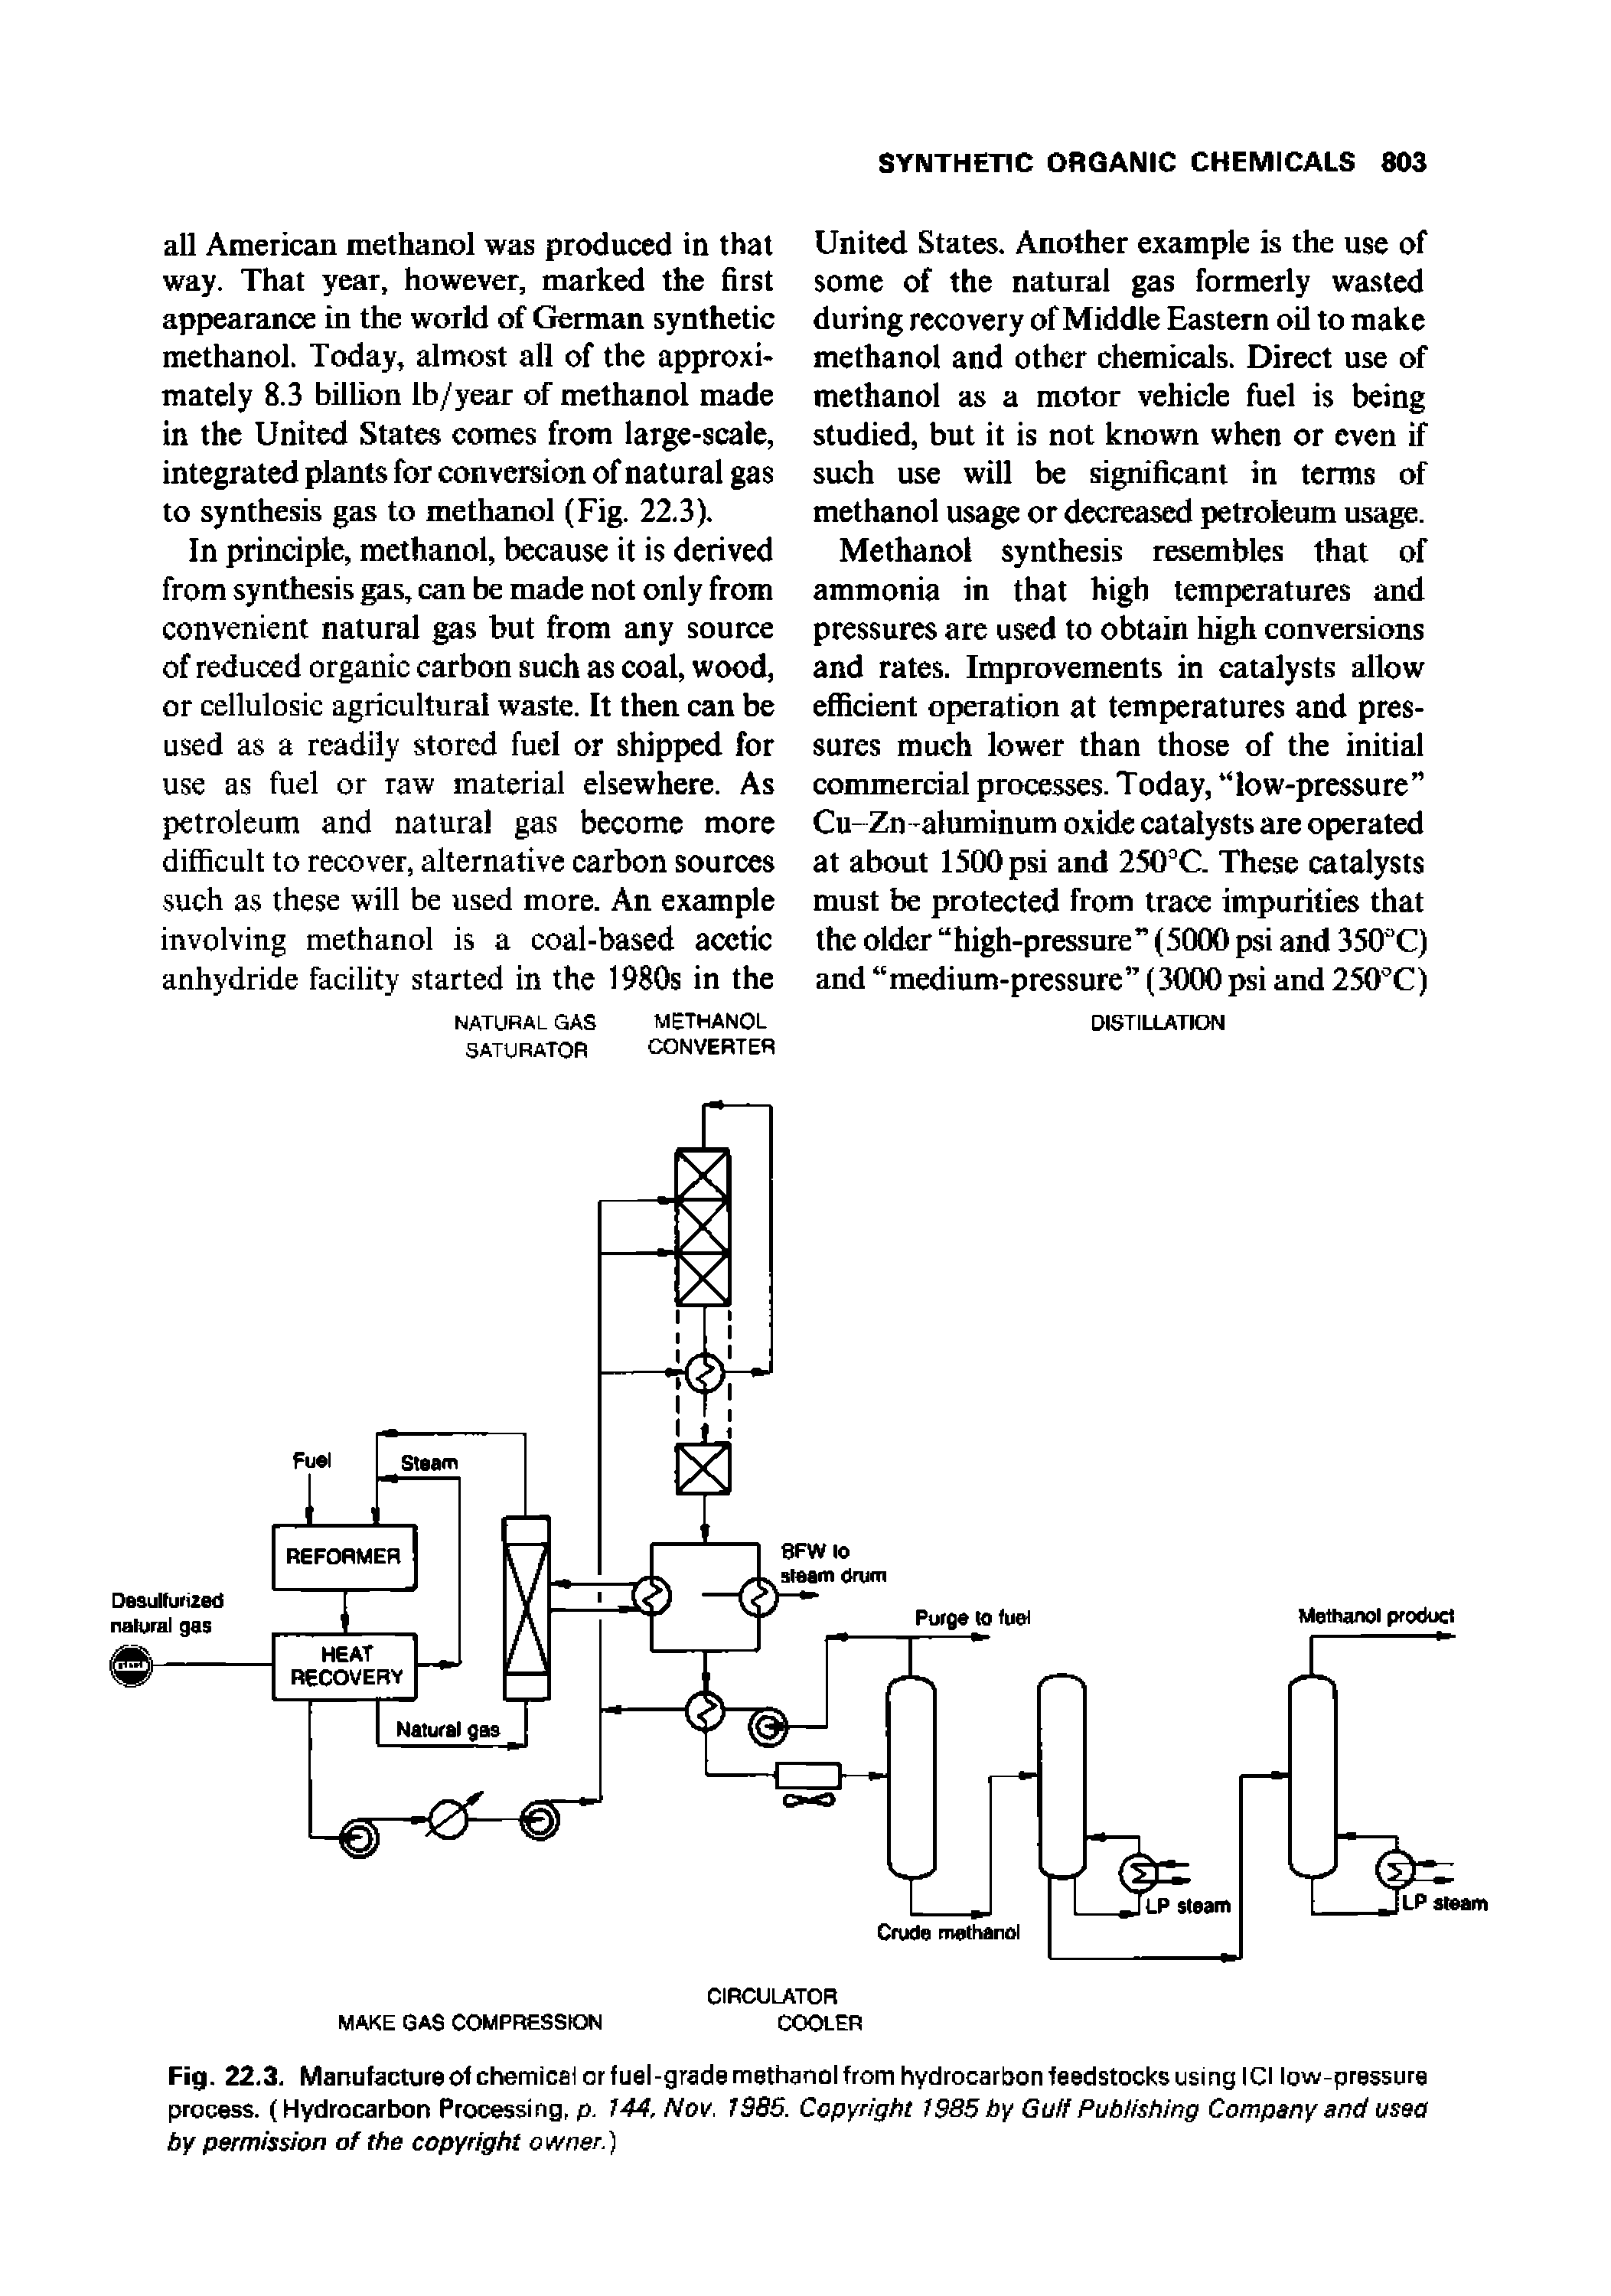 Fig. 22.3. Manufacture Of chemical or fuel-grade methanol from hydrocarbon feedstocks using ICI low-pressure process. (Hydrocarbon Processing, p. 144, Nov. 1986. Copyright 1985 by Guff Publishing Company and ussa by parmission of the copyright owner.)...